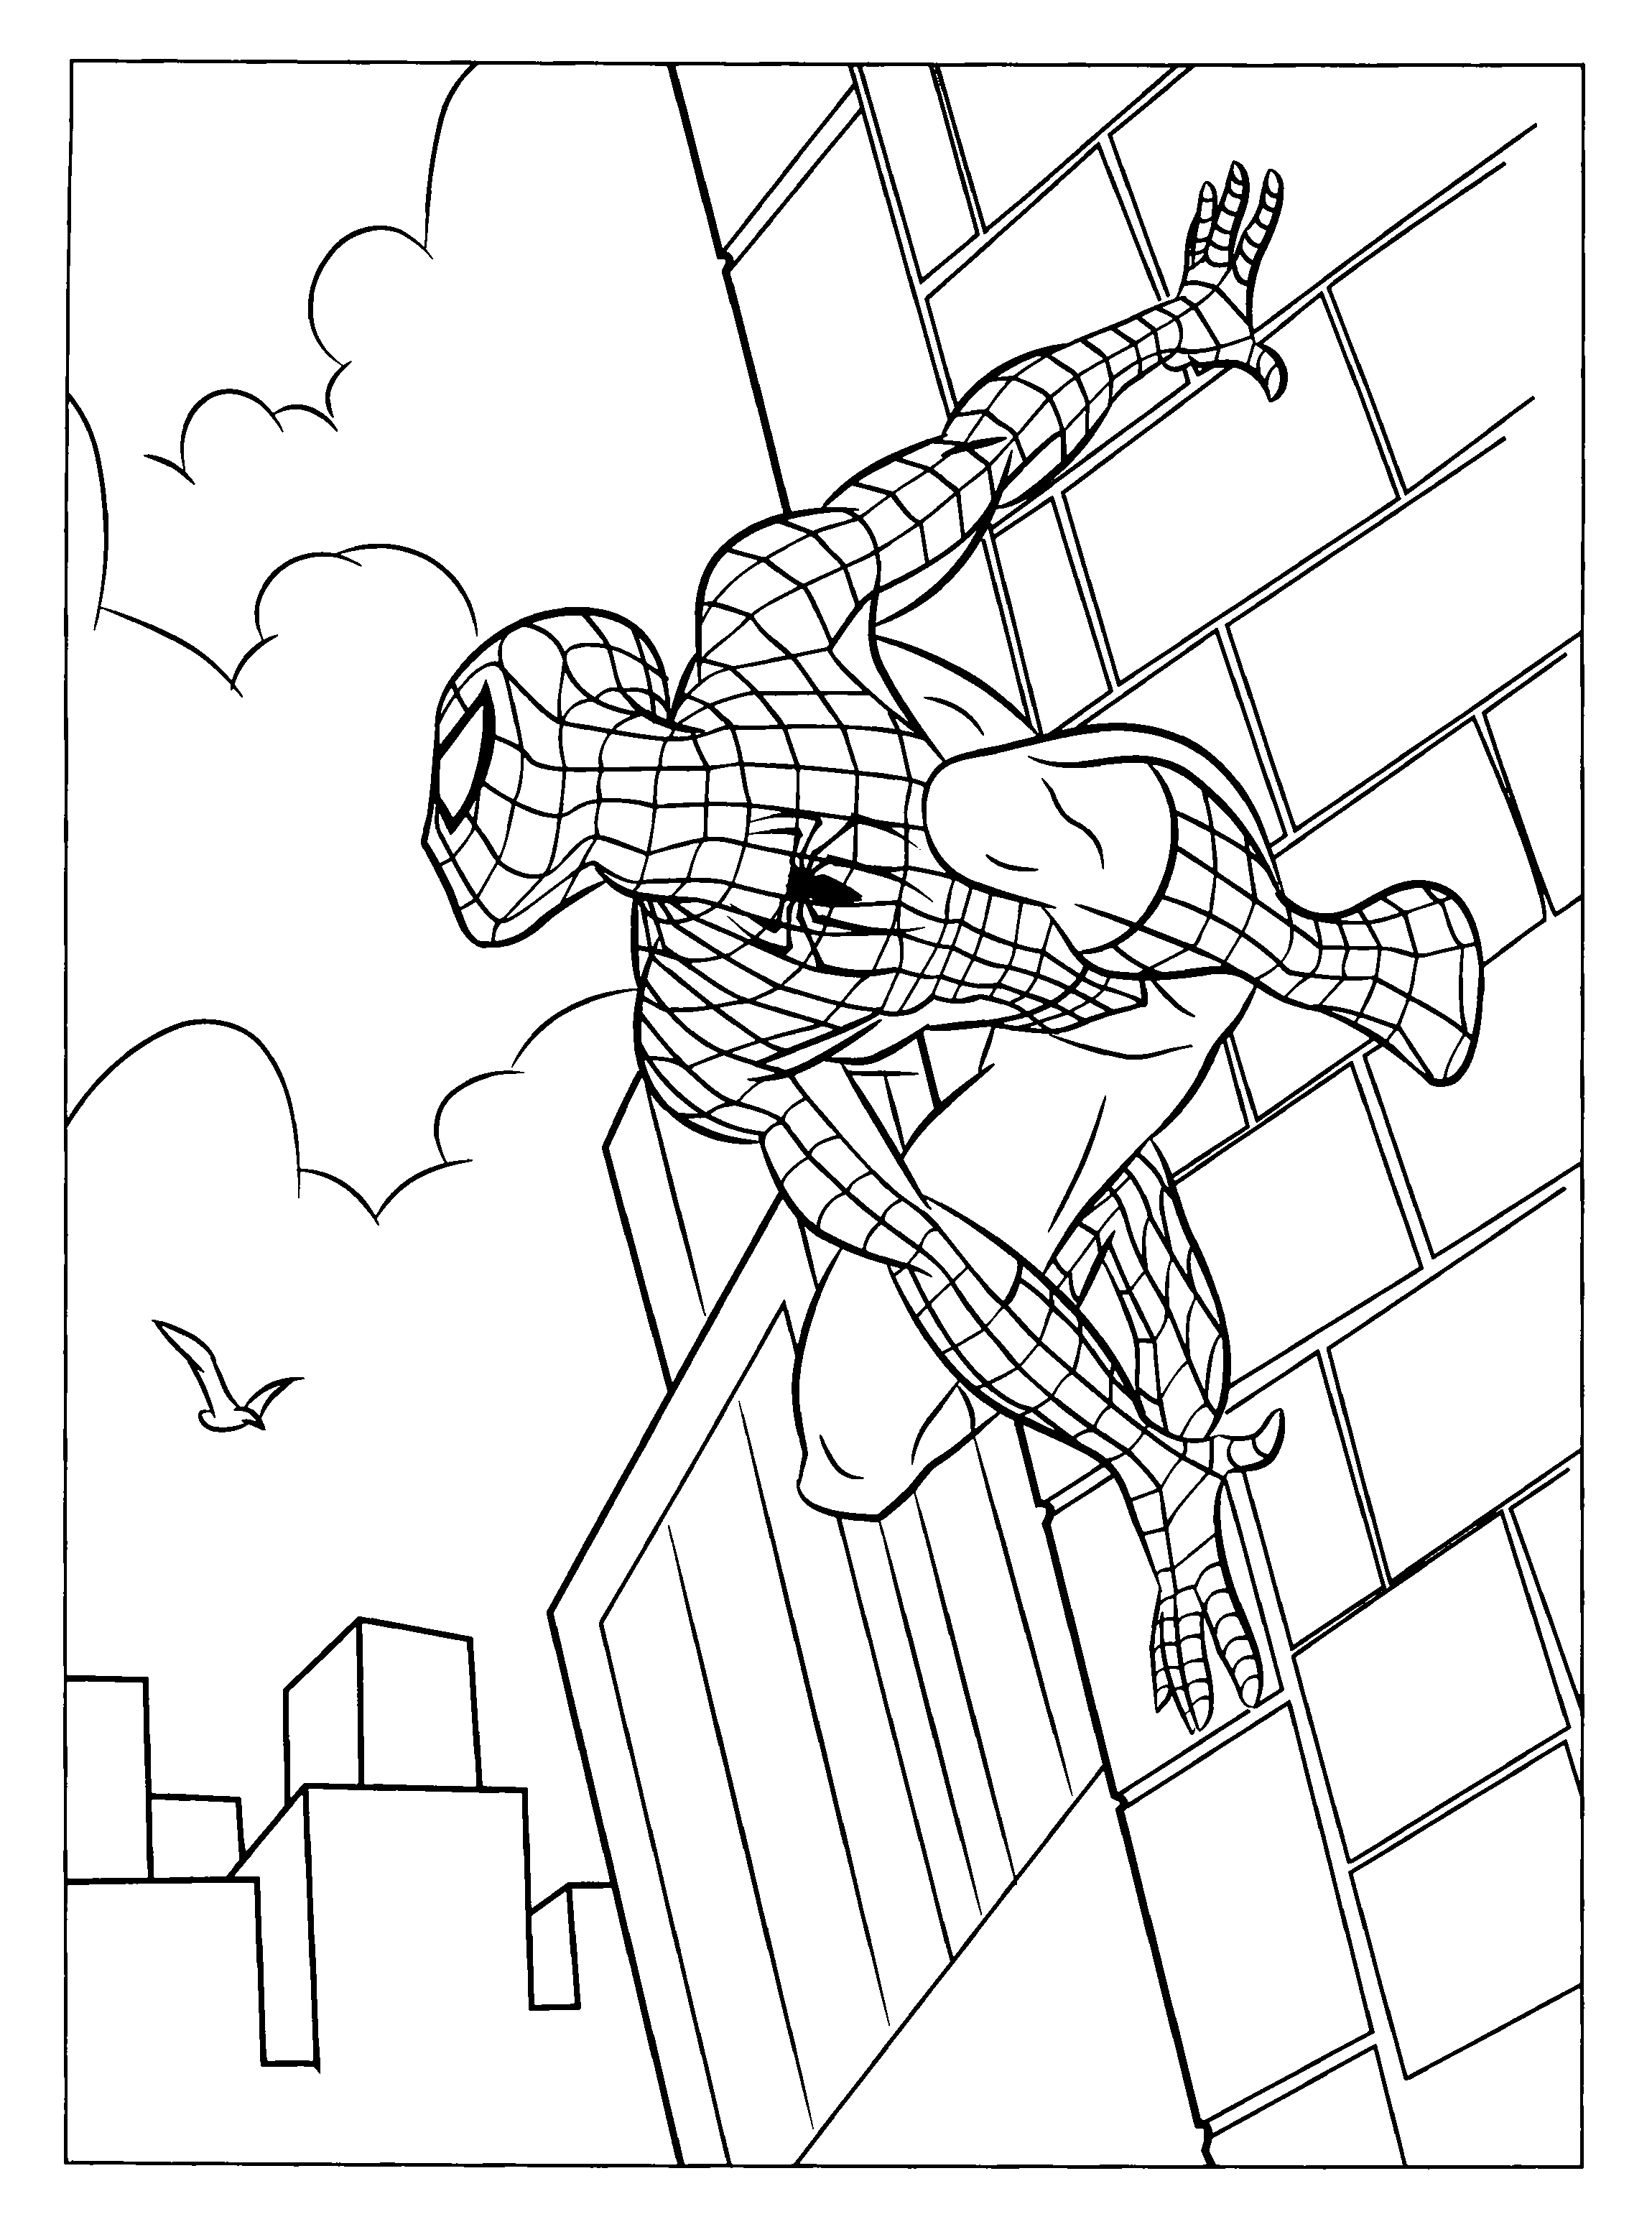 Printable Spiderman Coloring Pages For Kids coloring page